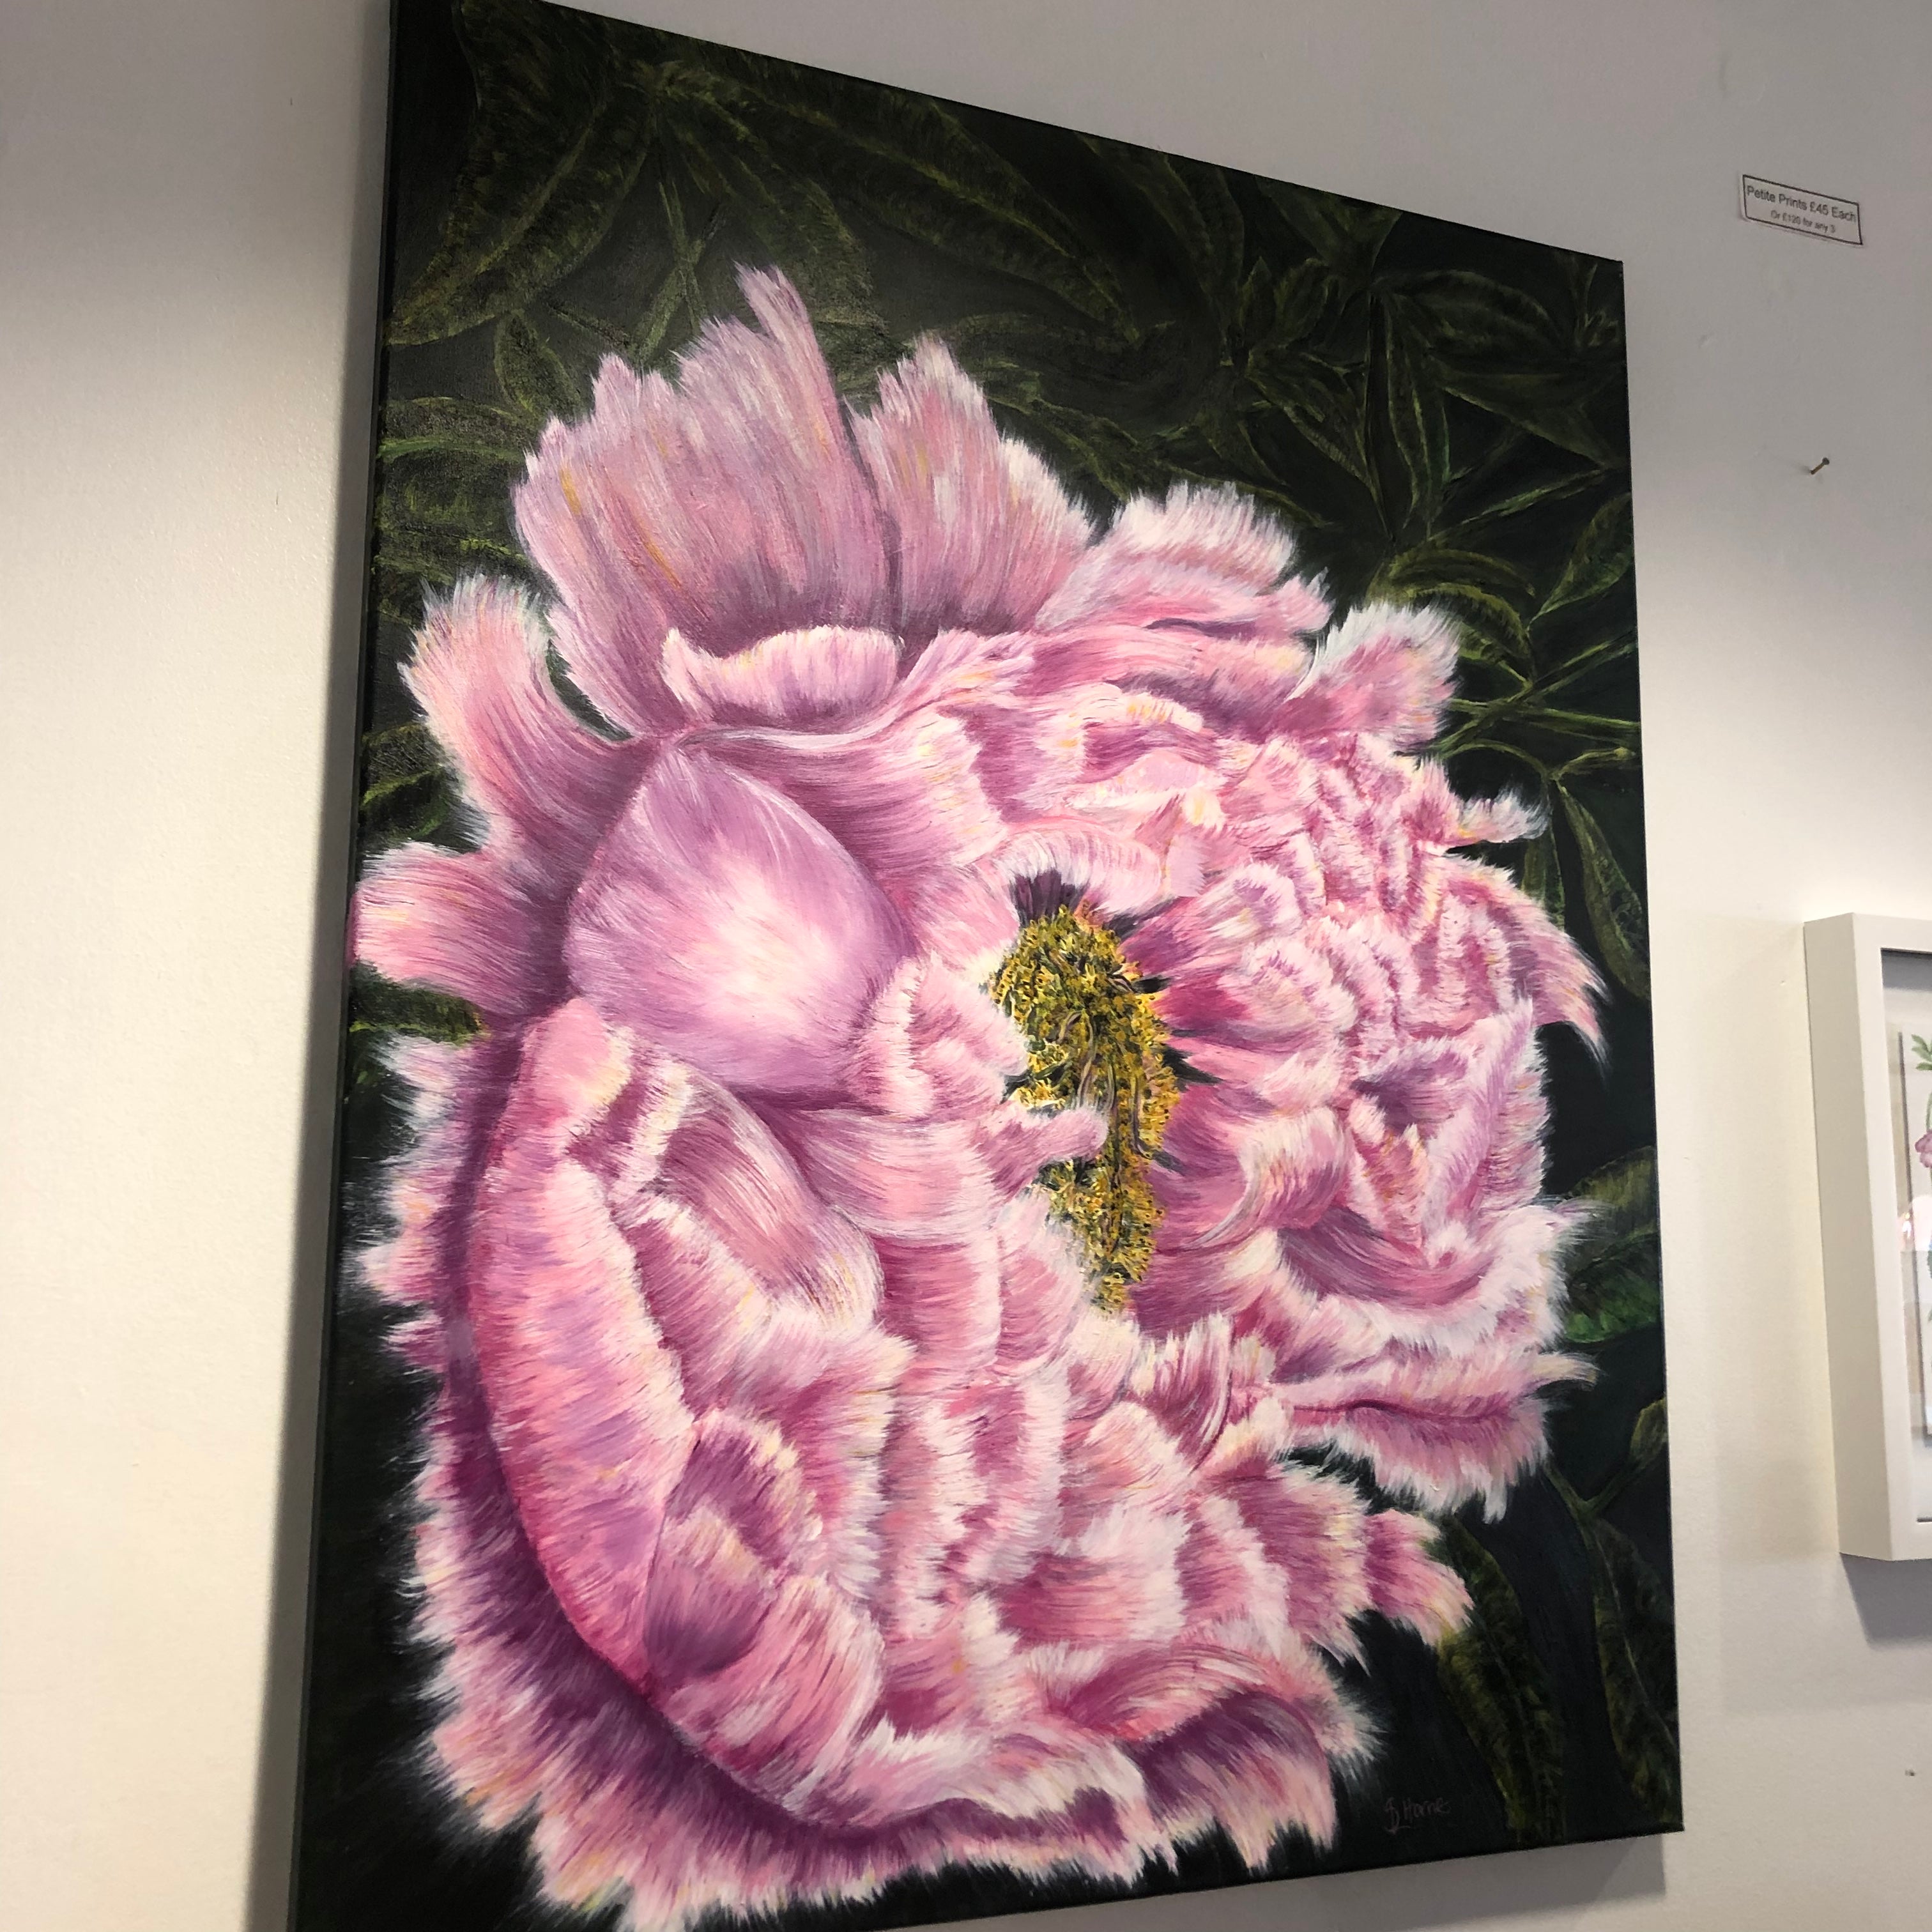 Pink Peony on Canvas Acrylic Painting